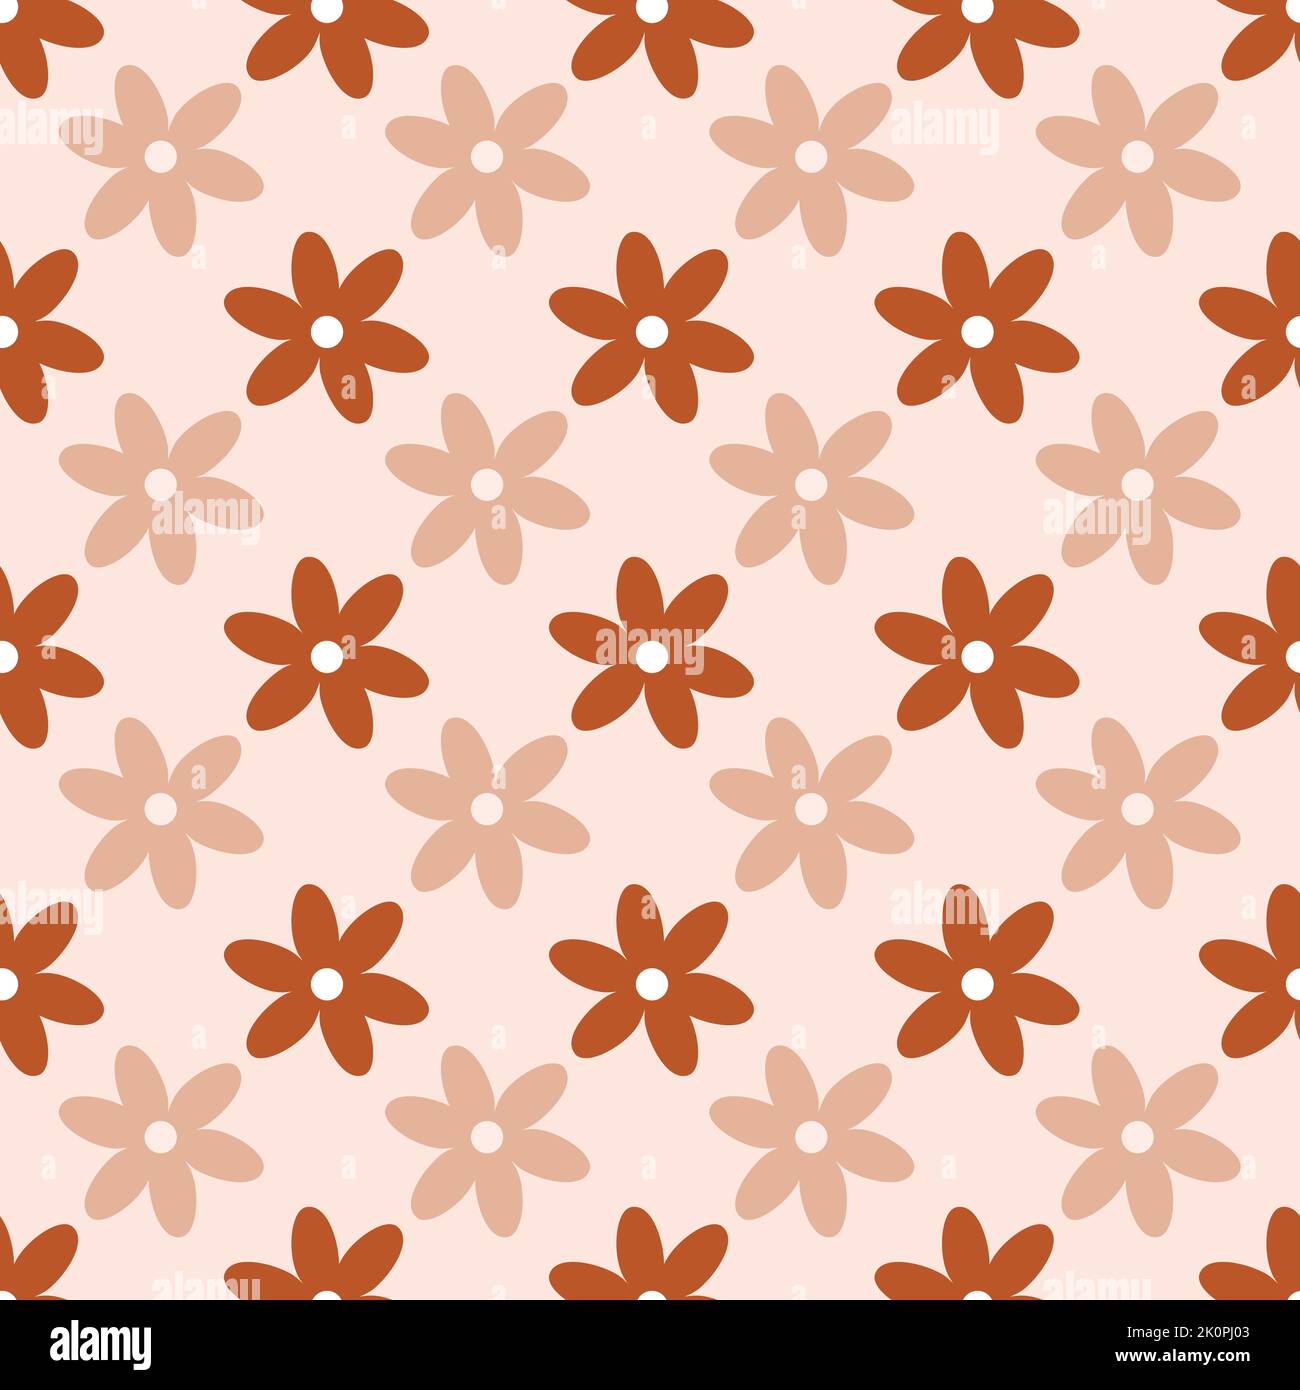 Simple flowers seamless pattern Stock Vector